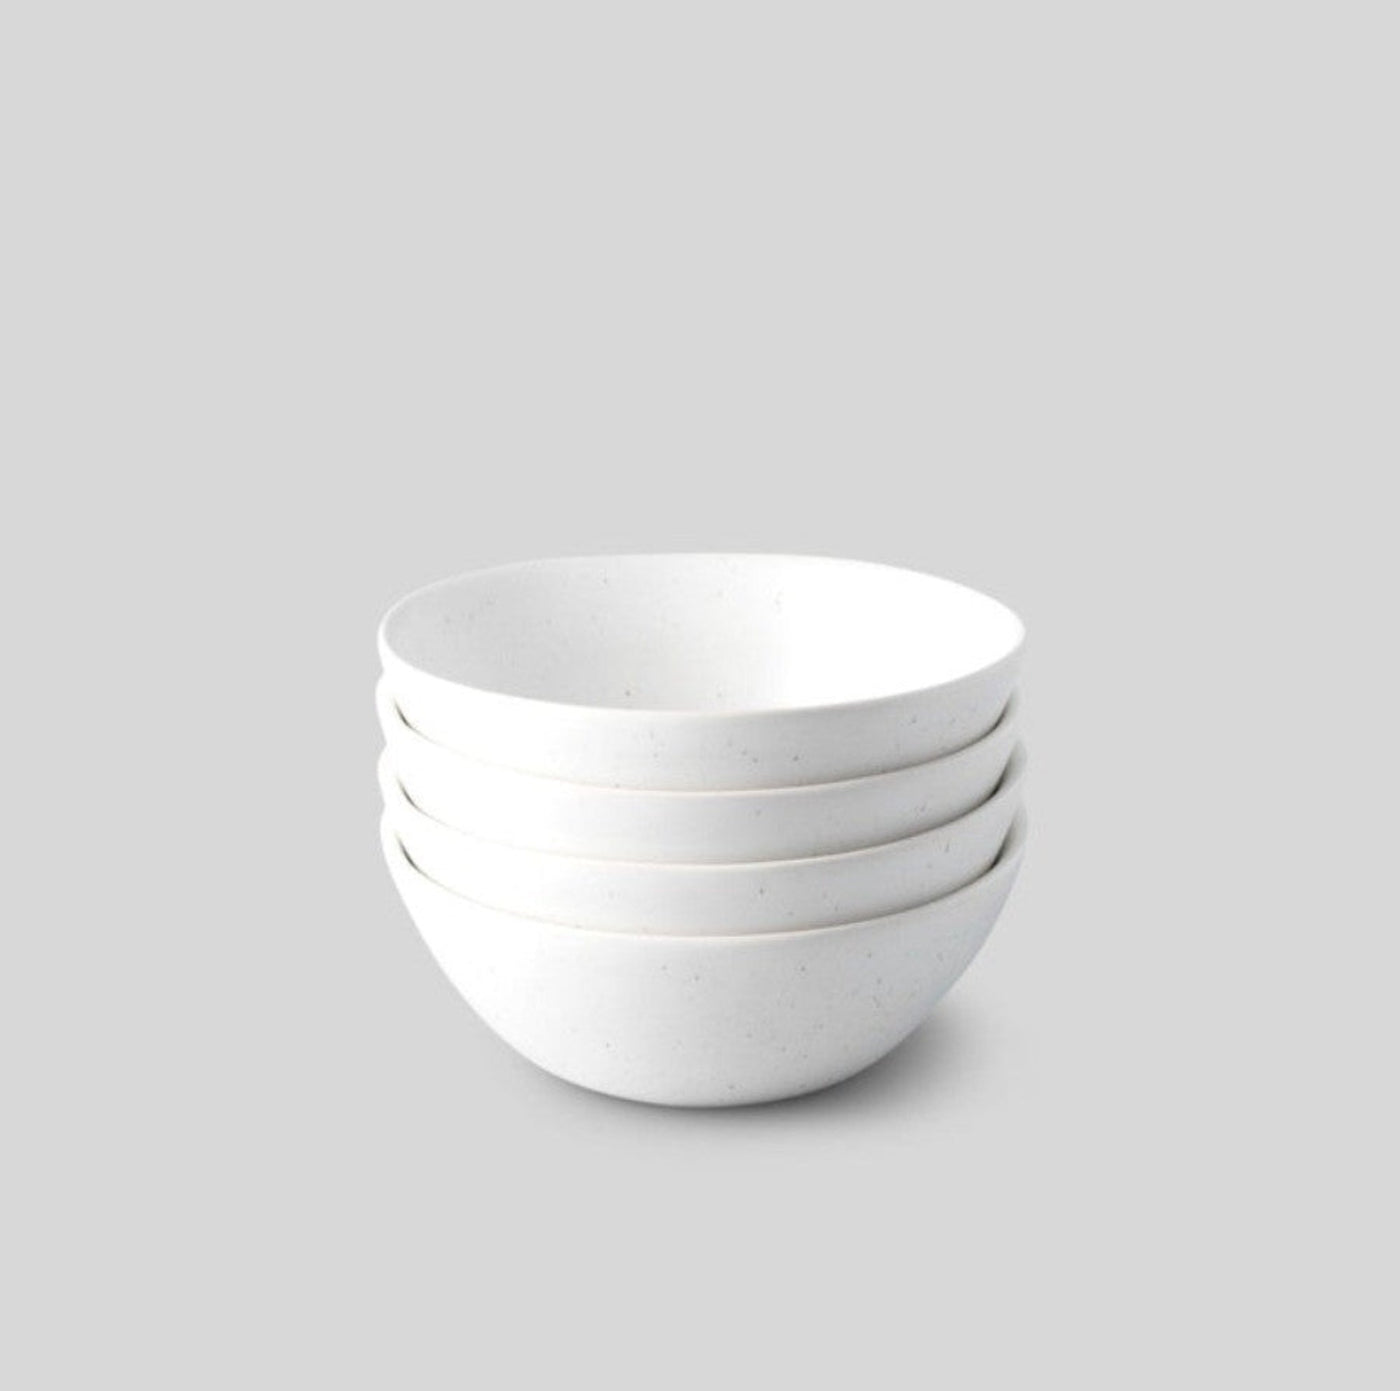 4 piece stoneware bowls · Size: 6.5" dia x 2.25" H / 1.1 lb each. Holds 20 oz · Use at breakfast, or for soup or dessert · Organic-shaped speckled white - #832960000444